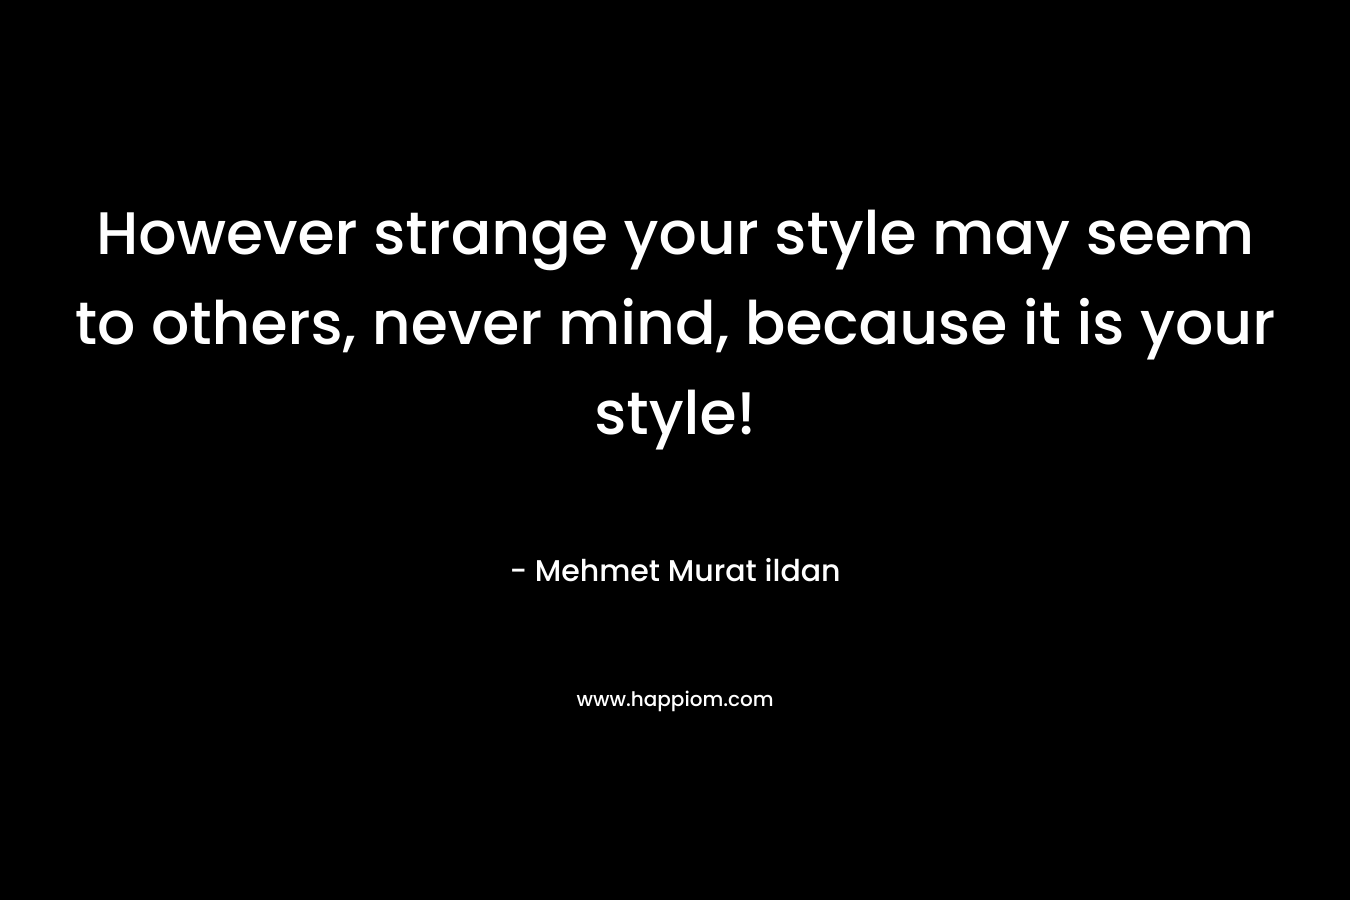 However strange your style may seem to others, never mind, because it is your style!